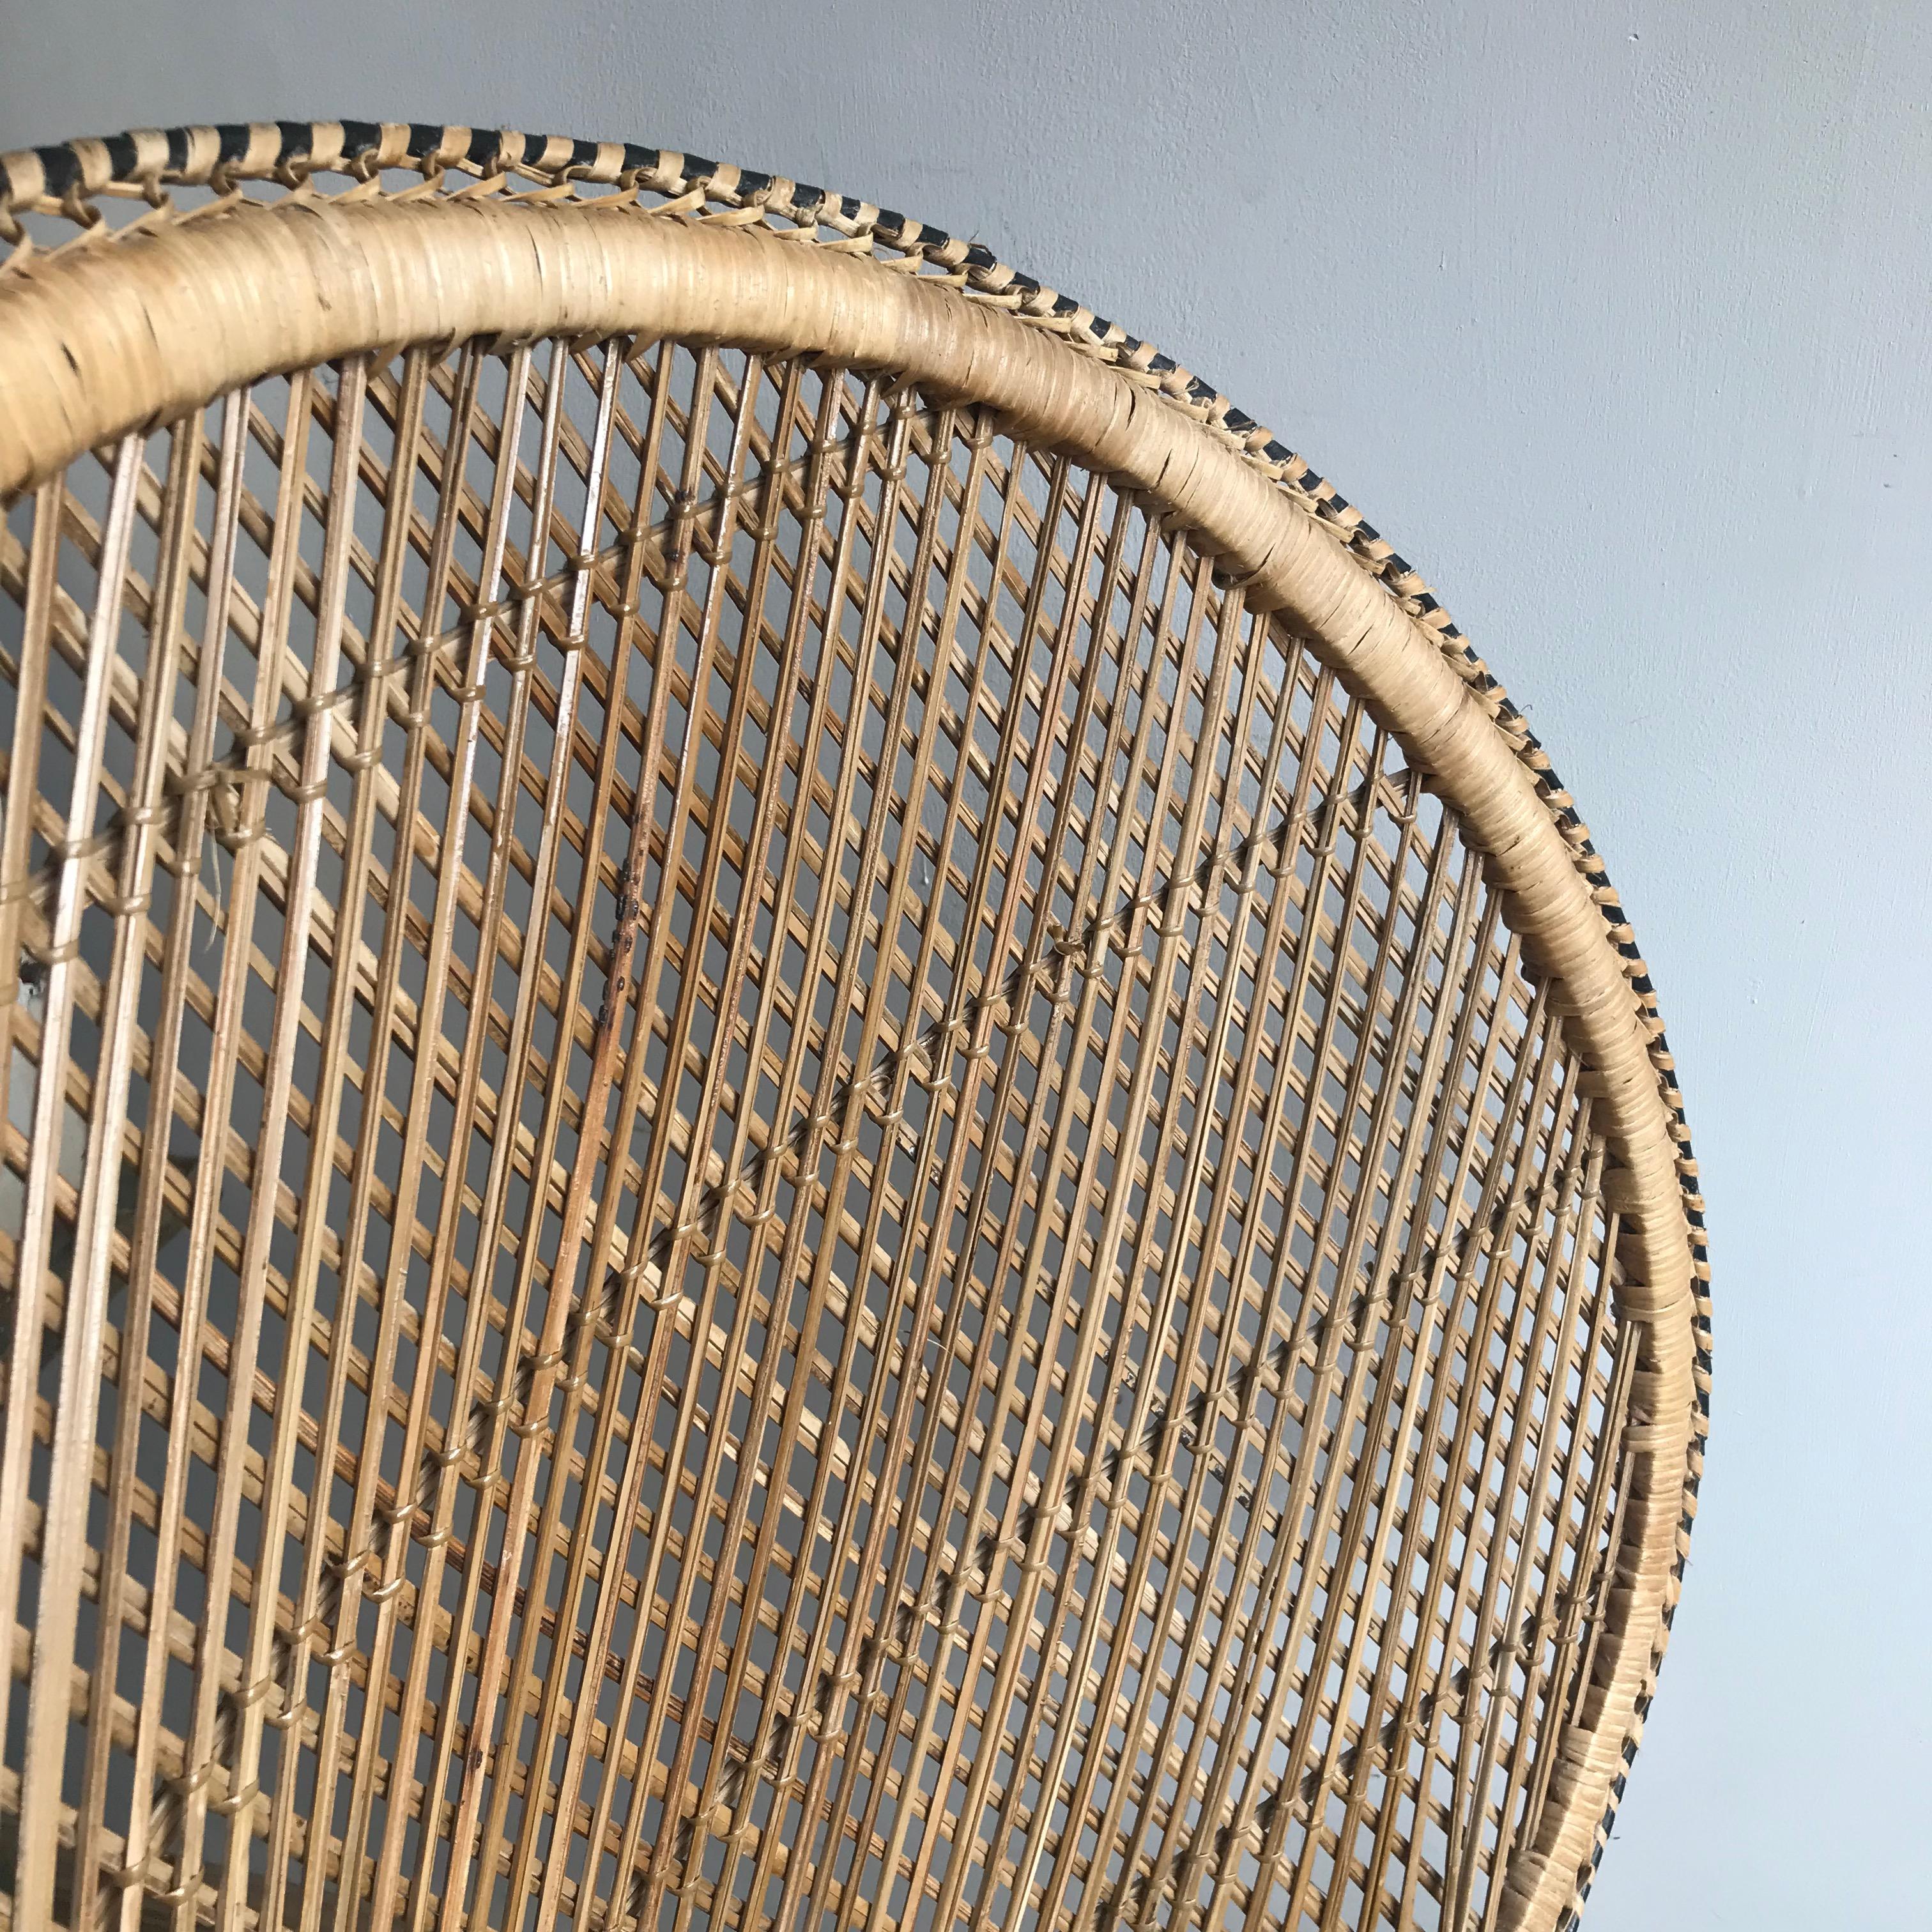 An original 1970s woven rattan peacock chair with a straight base and large fan back. The Emmanuel/peacock is constructed of intricate woven designs of bamboo and wicker. The chair is in very good vintage condition, the rattan has age-appropriate